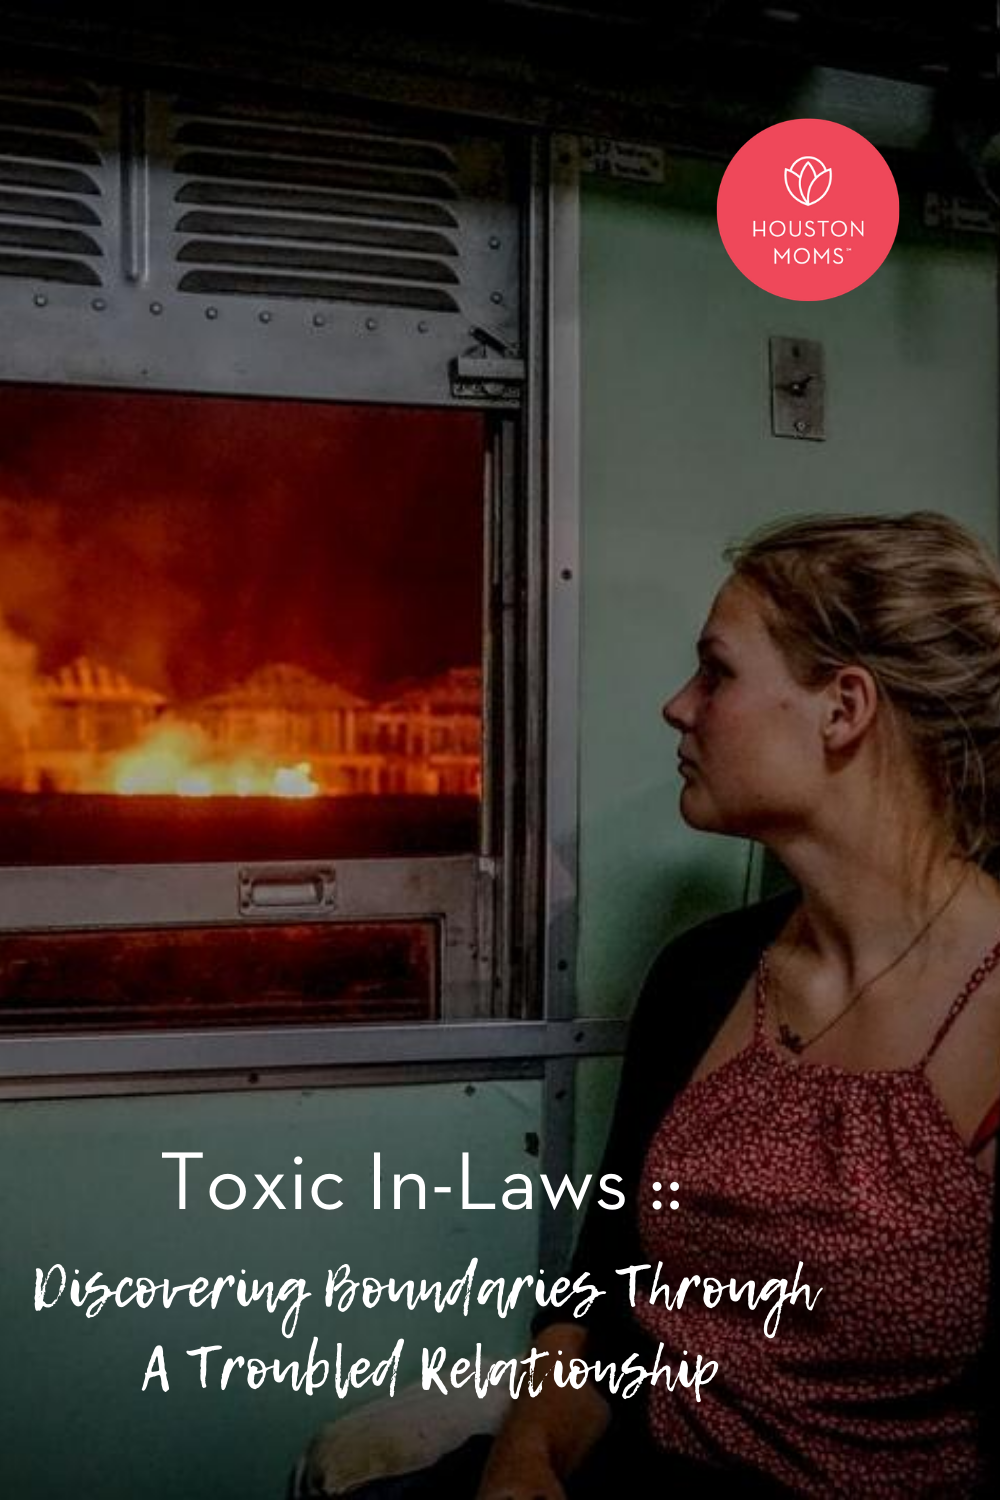 Toxic In-Laws: Discovering Boundaries Through a Troubled Relationship. Logo: Houston Moms. A photograph of a woman looking out a window at a house on fire. 